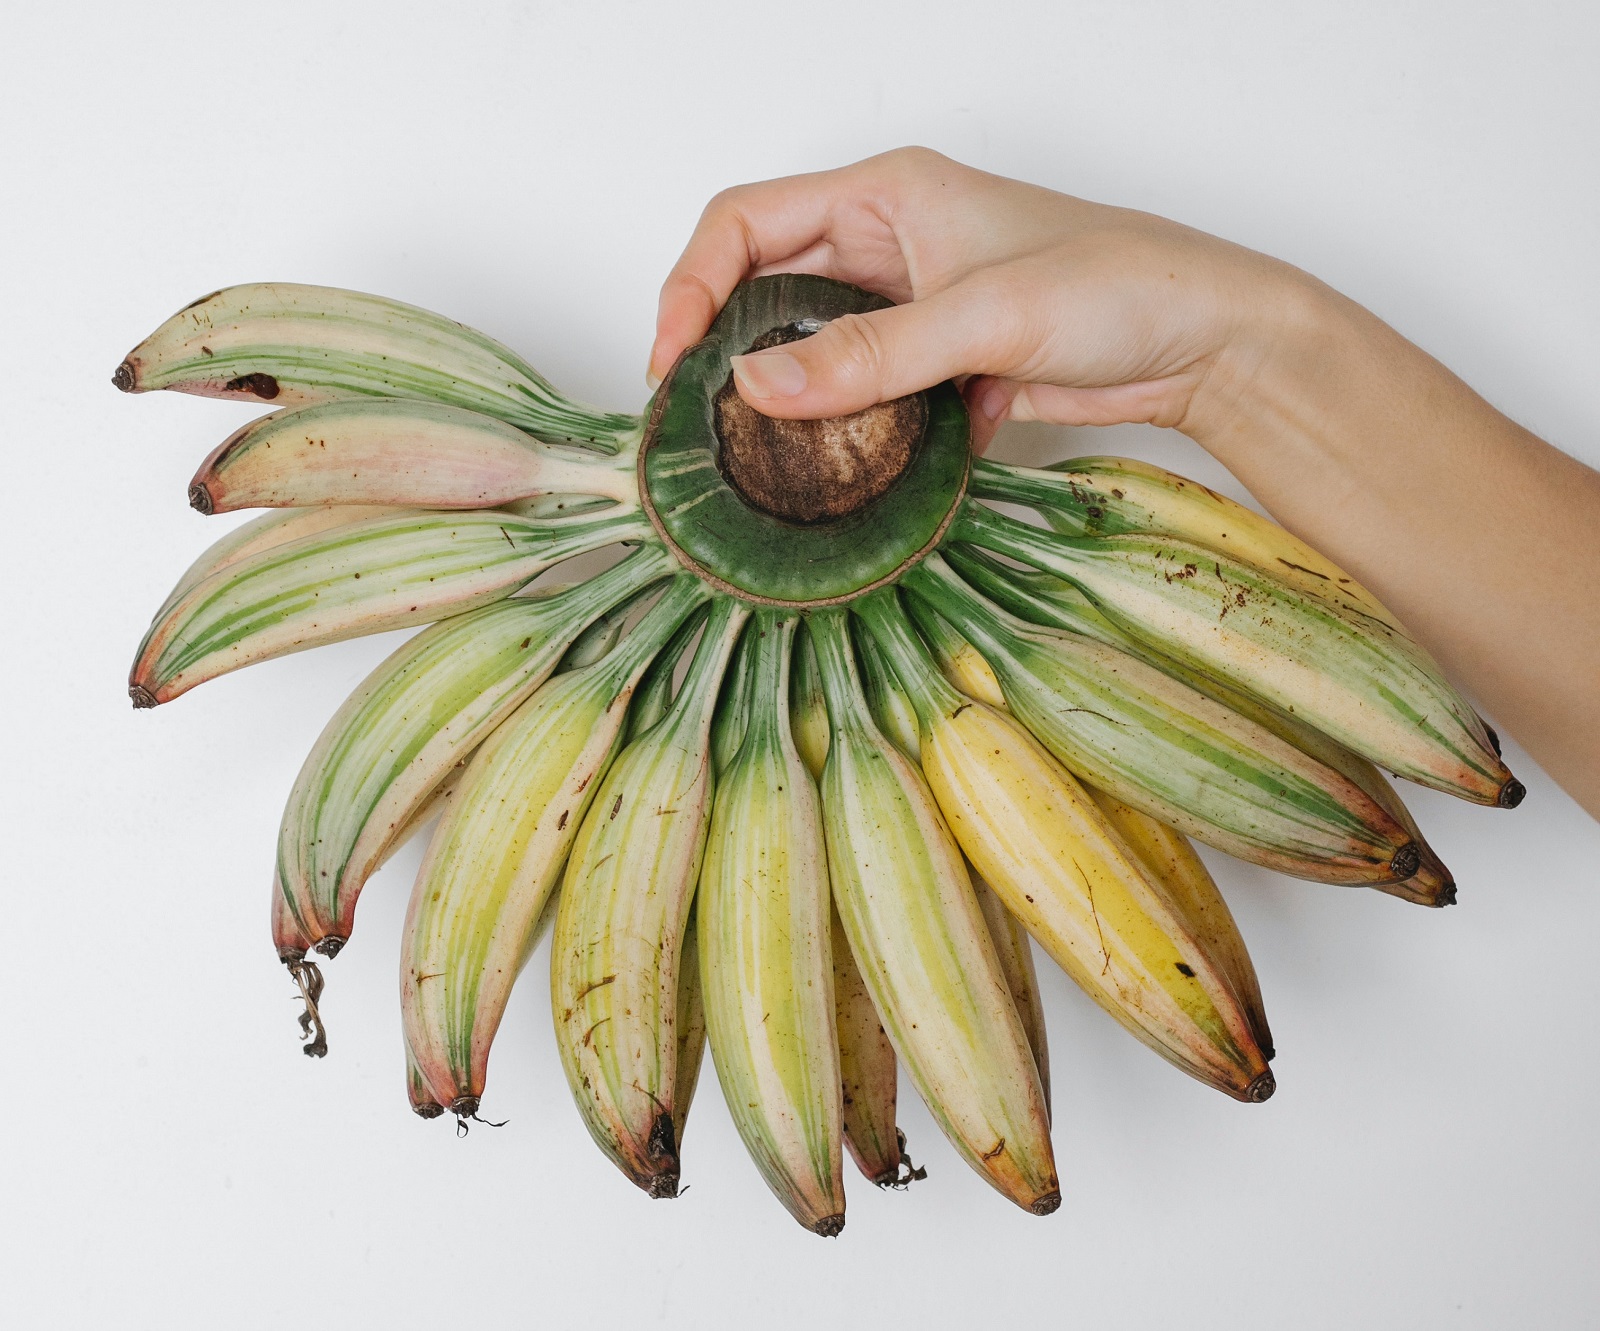 Banana for beauty. We suggest how to use this fruit yourself to create great cosmetics